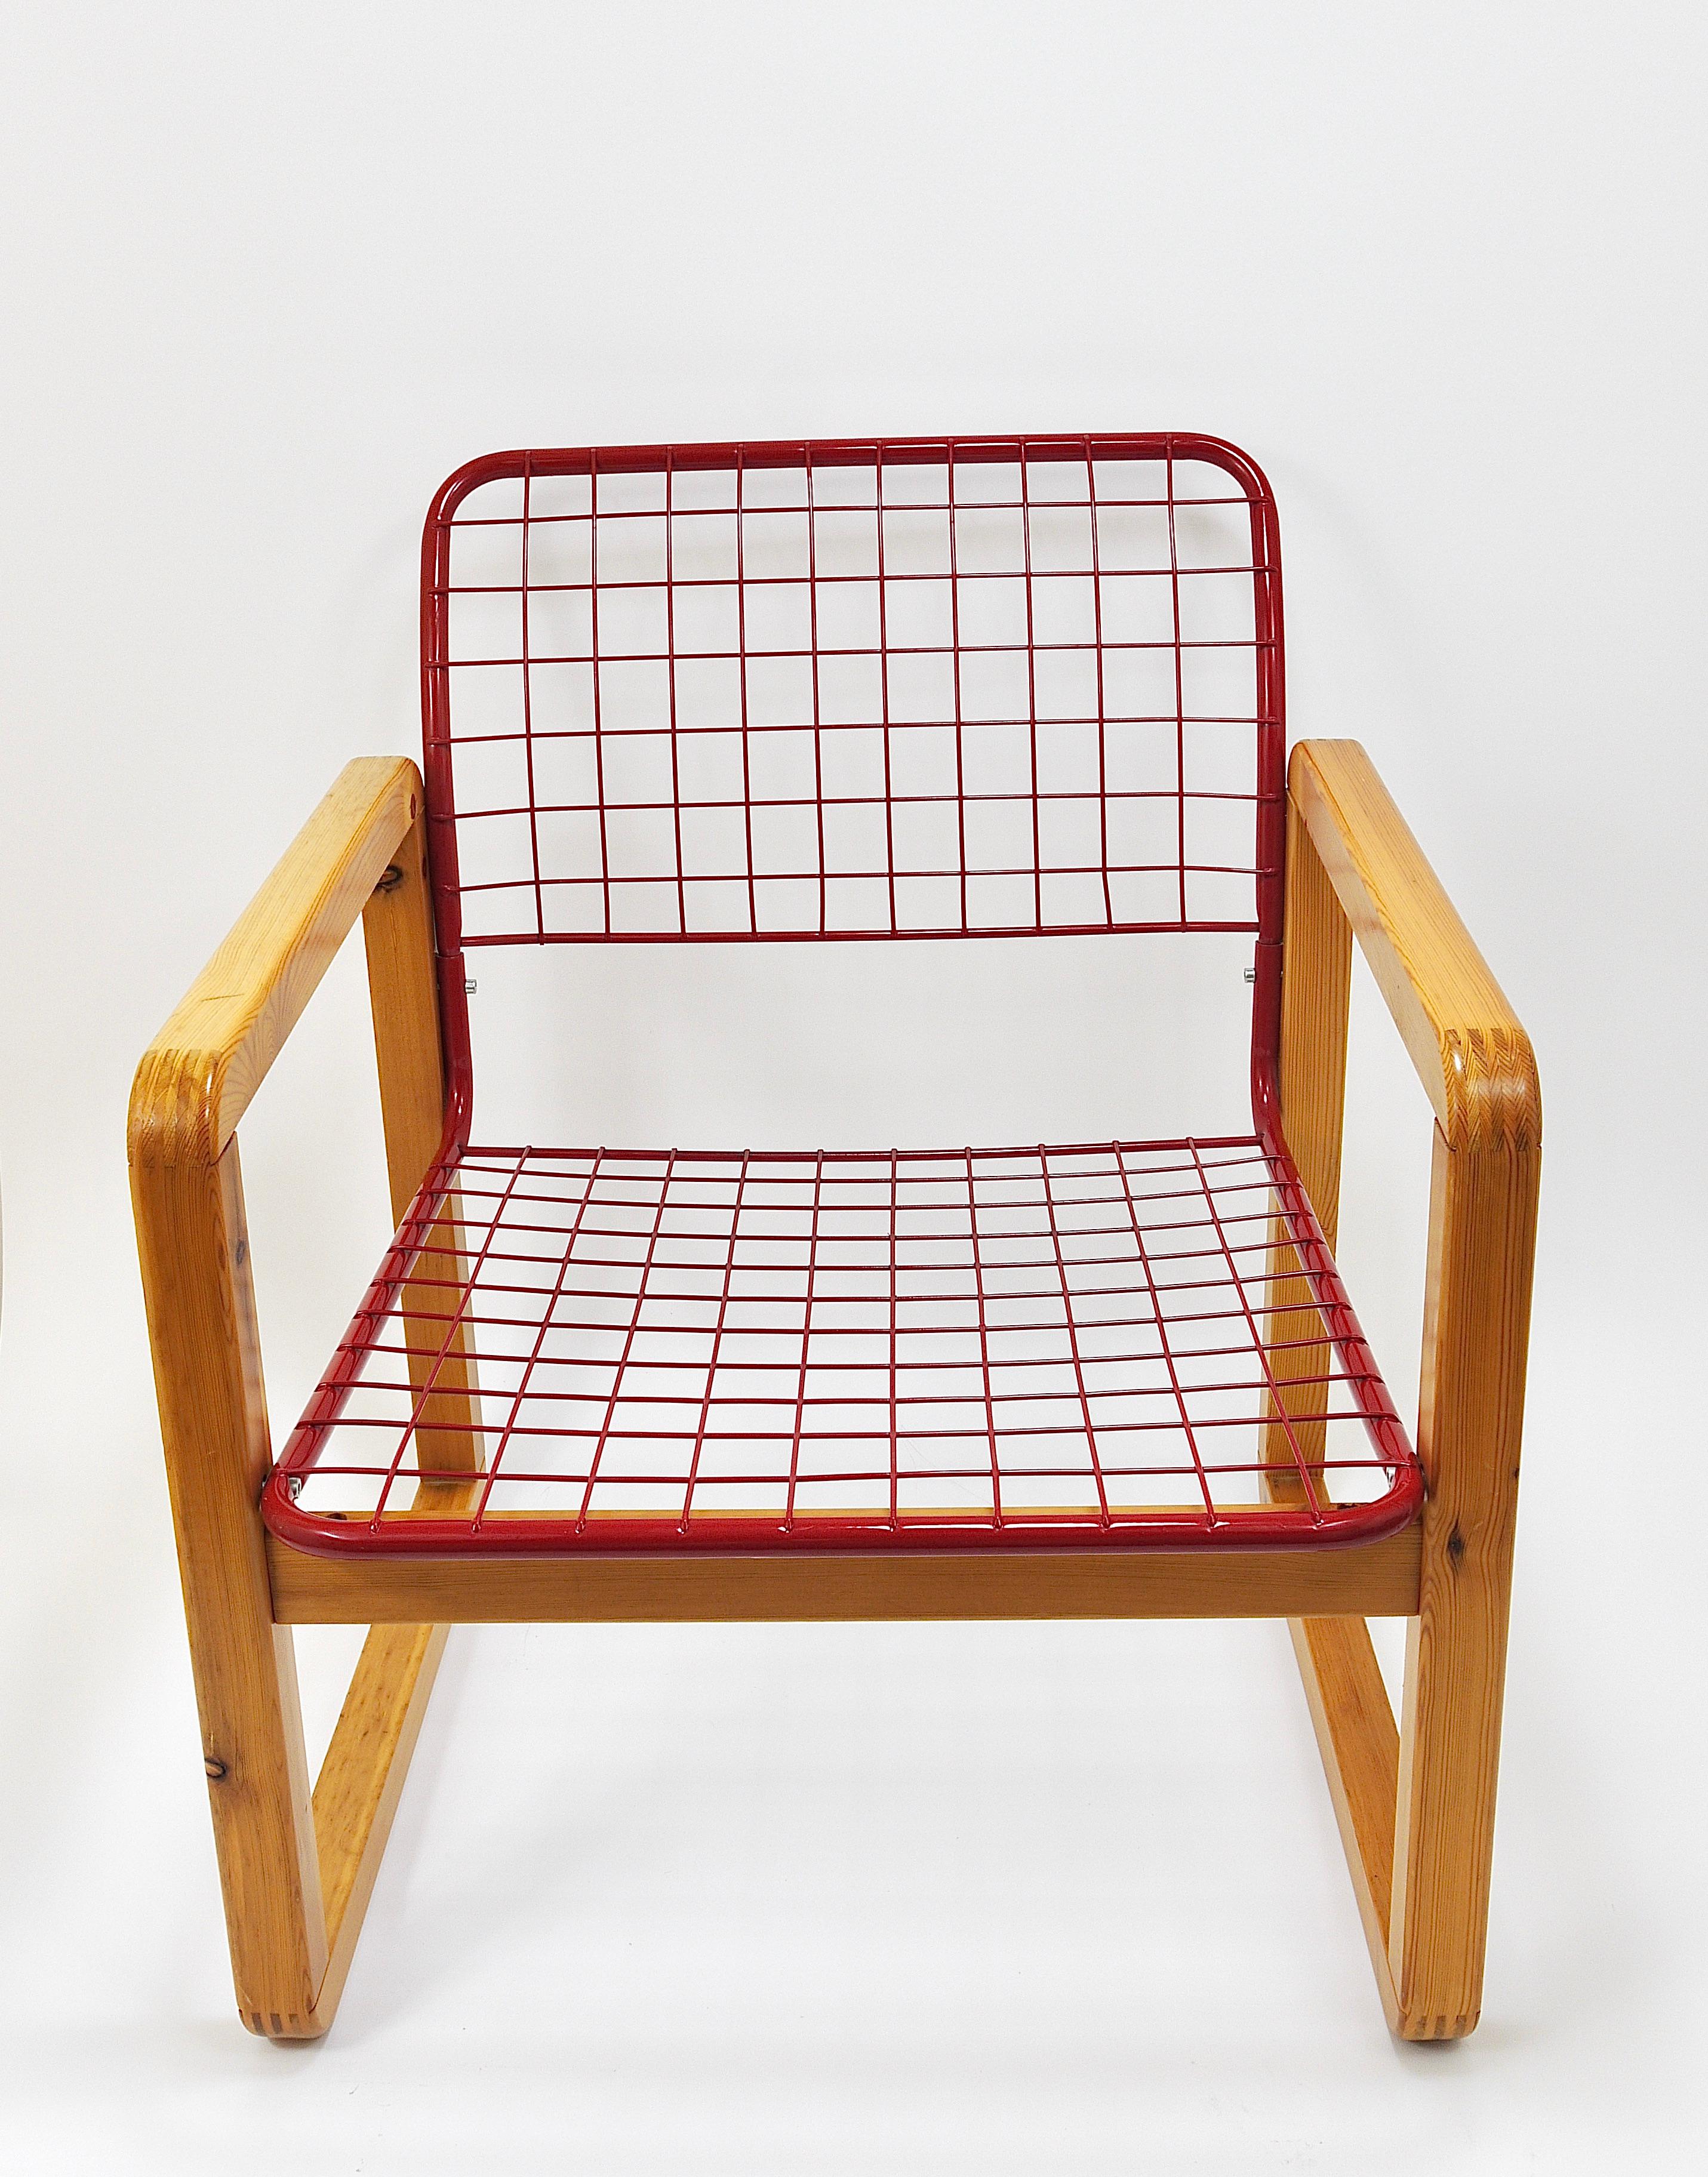 Never Unboxed 1980s Lounge Chair Armchair by Knut & Marianne Hagberg for Ikea For Sale 9